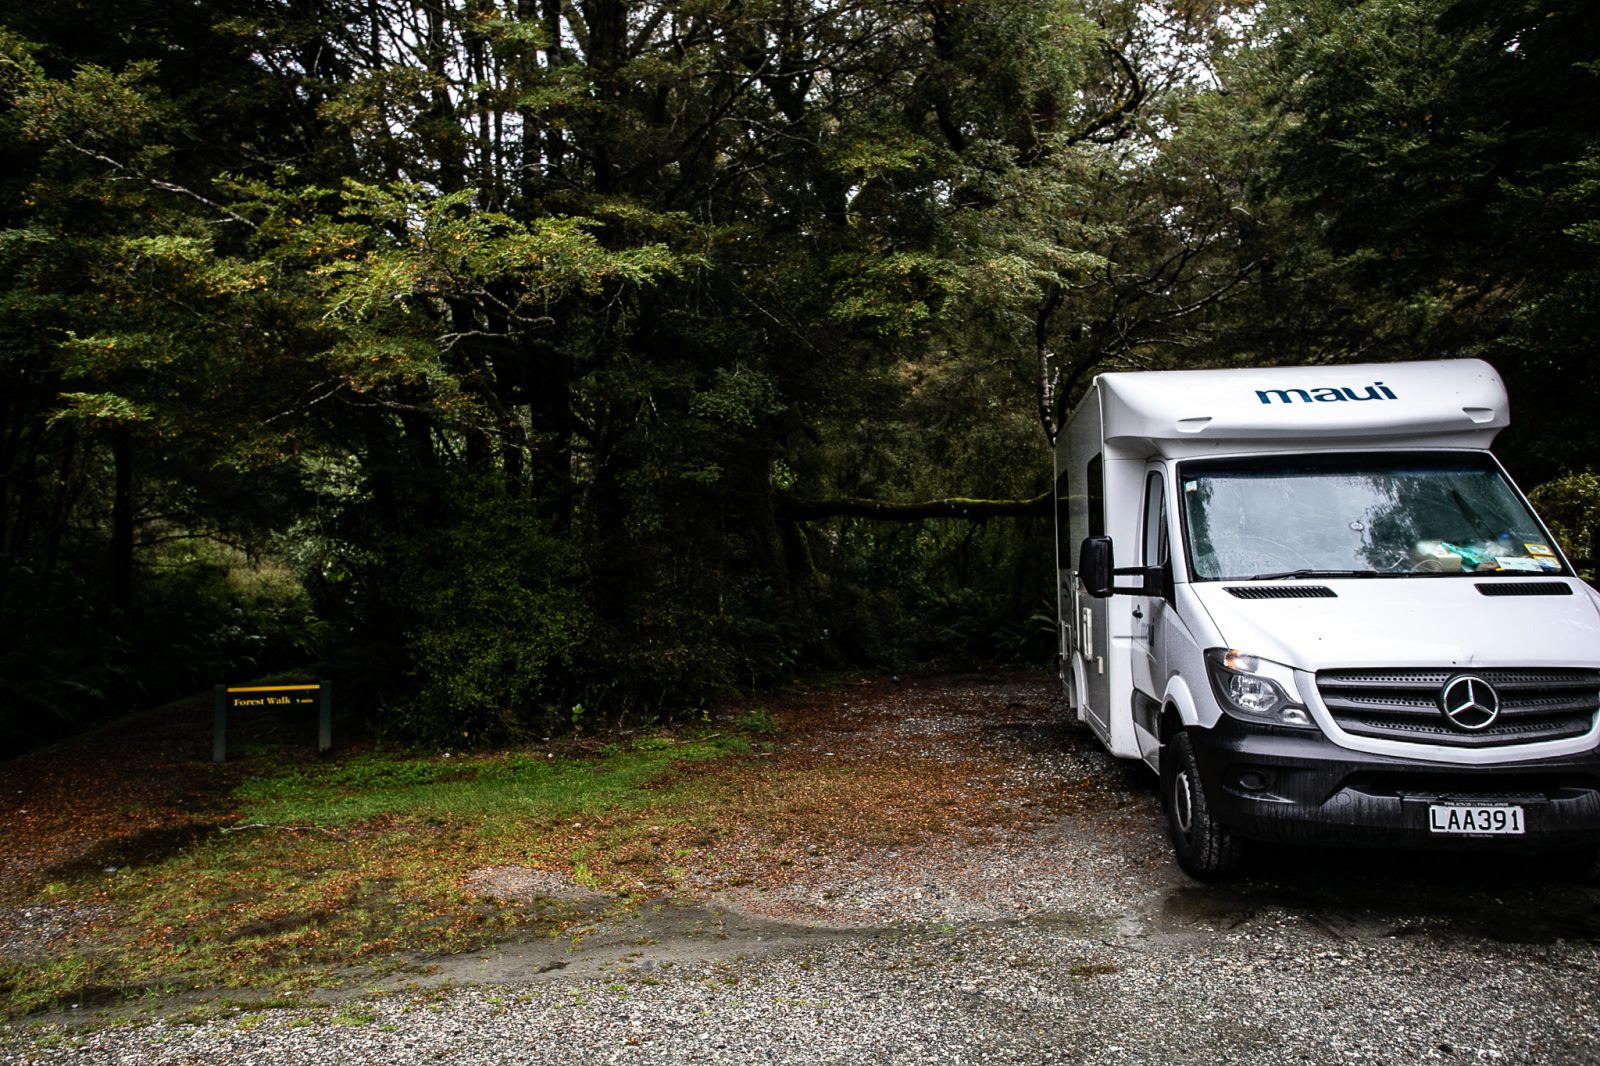 PicTrax for Caravan, camping, RV and van life lifestyles